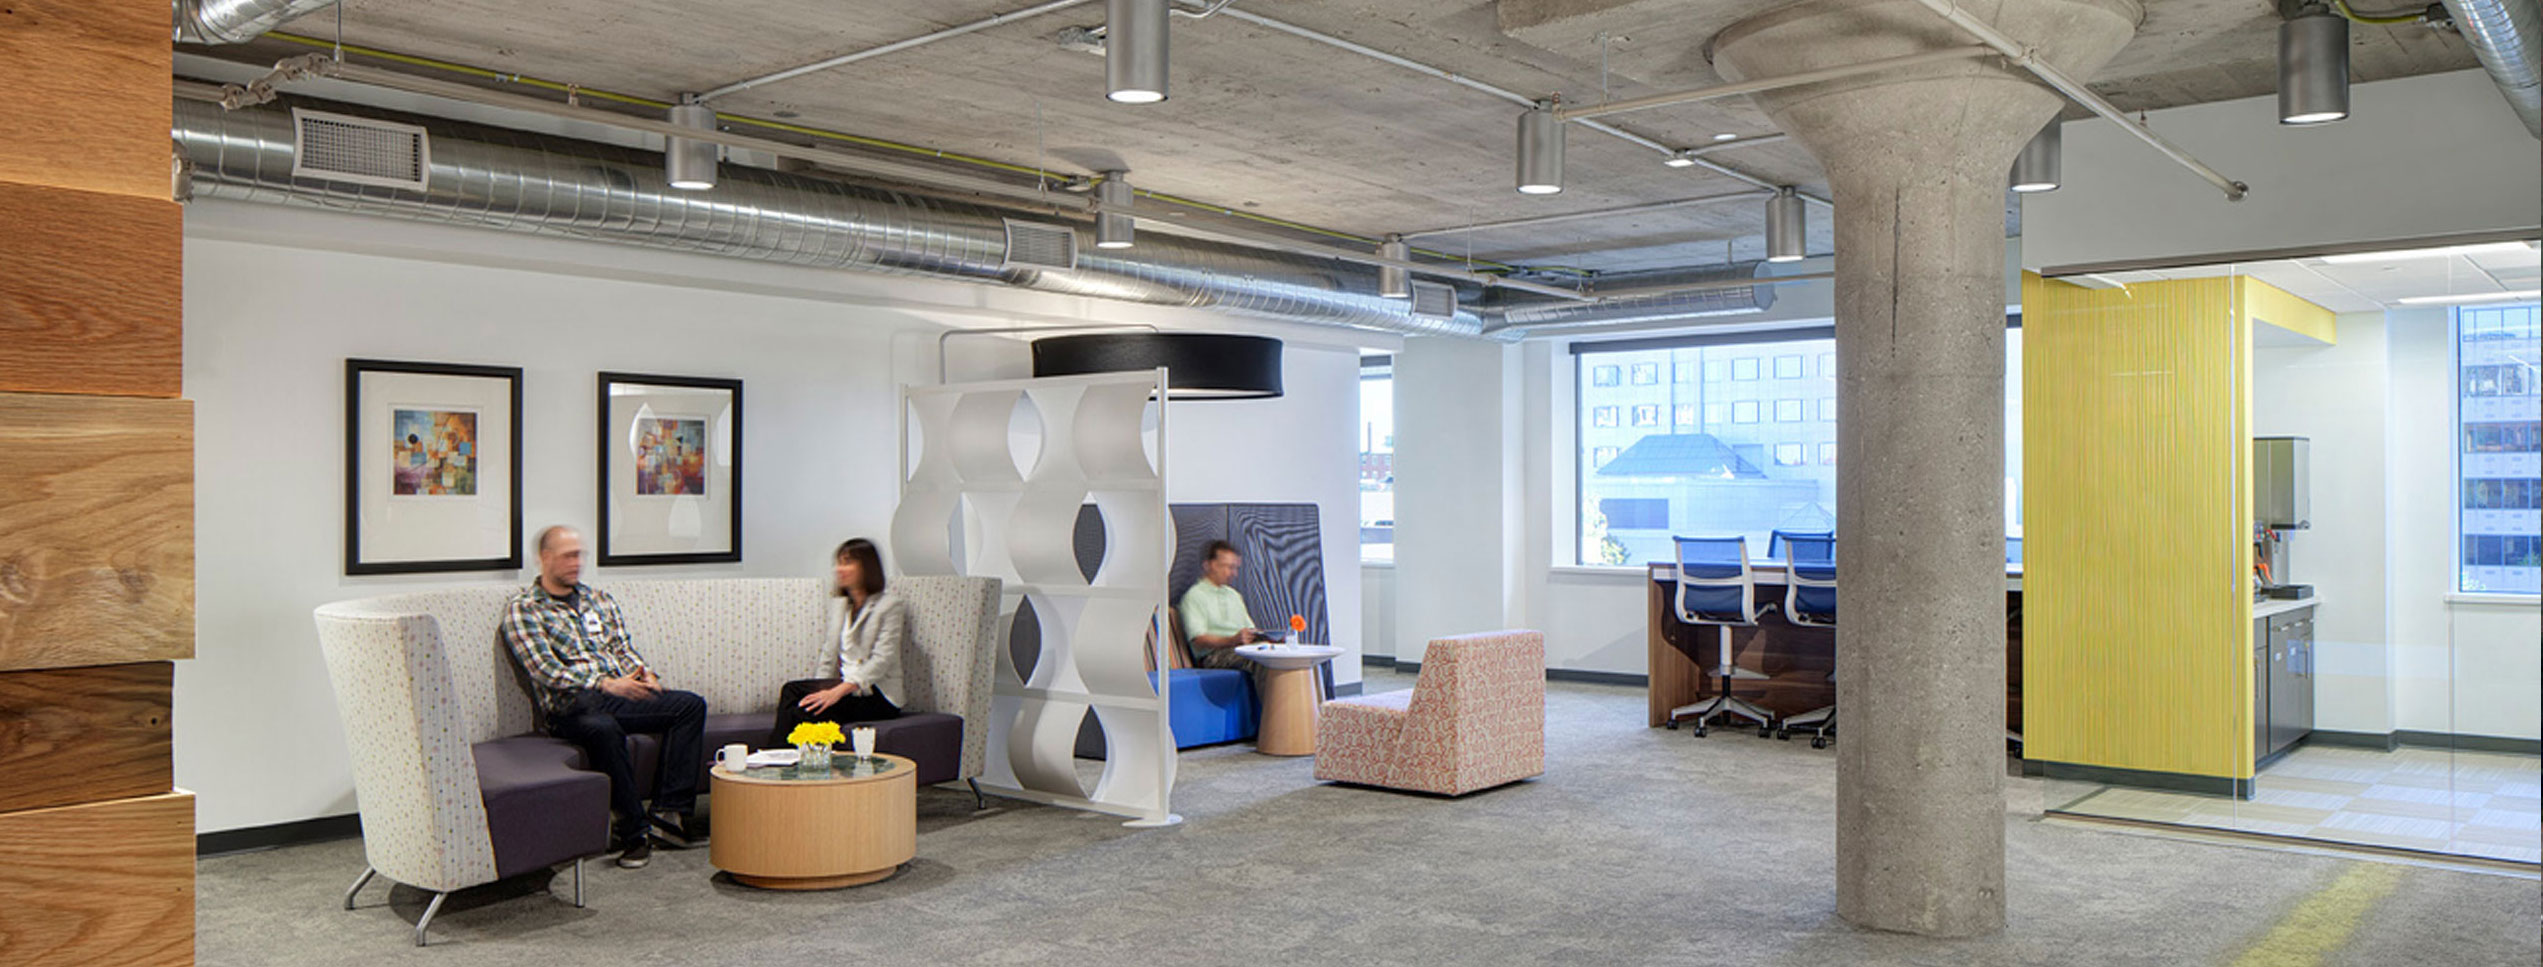 modern design office area in Northwestern Mutual for flexible working spaces